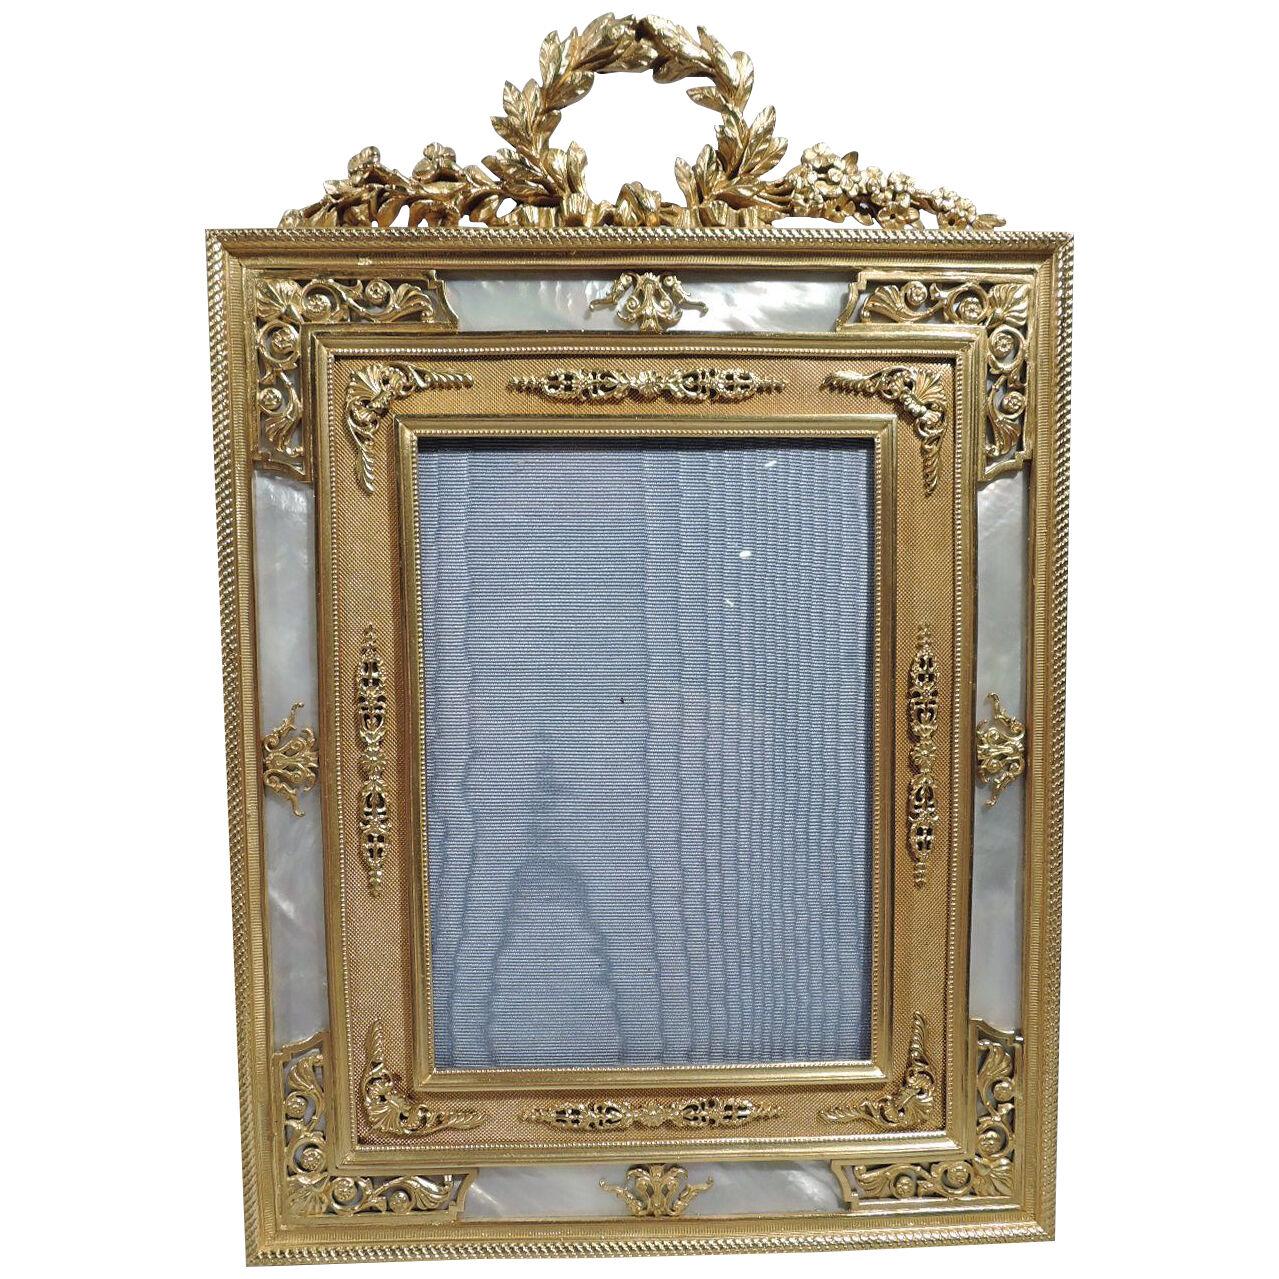 French Belle Epoque Empire Gilt Bronze & Mother of Pearl Picture Frame